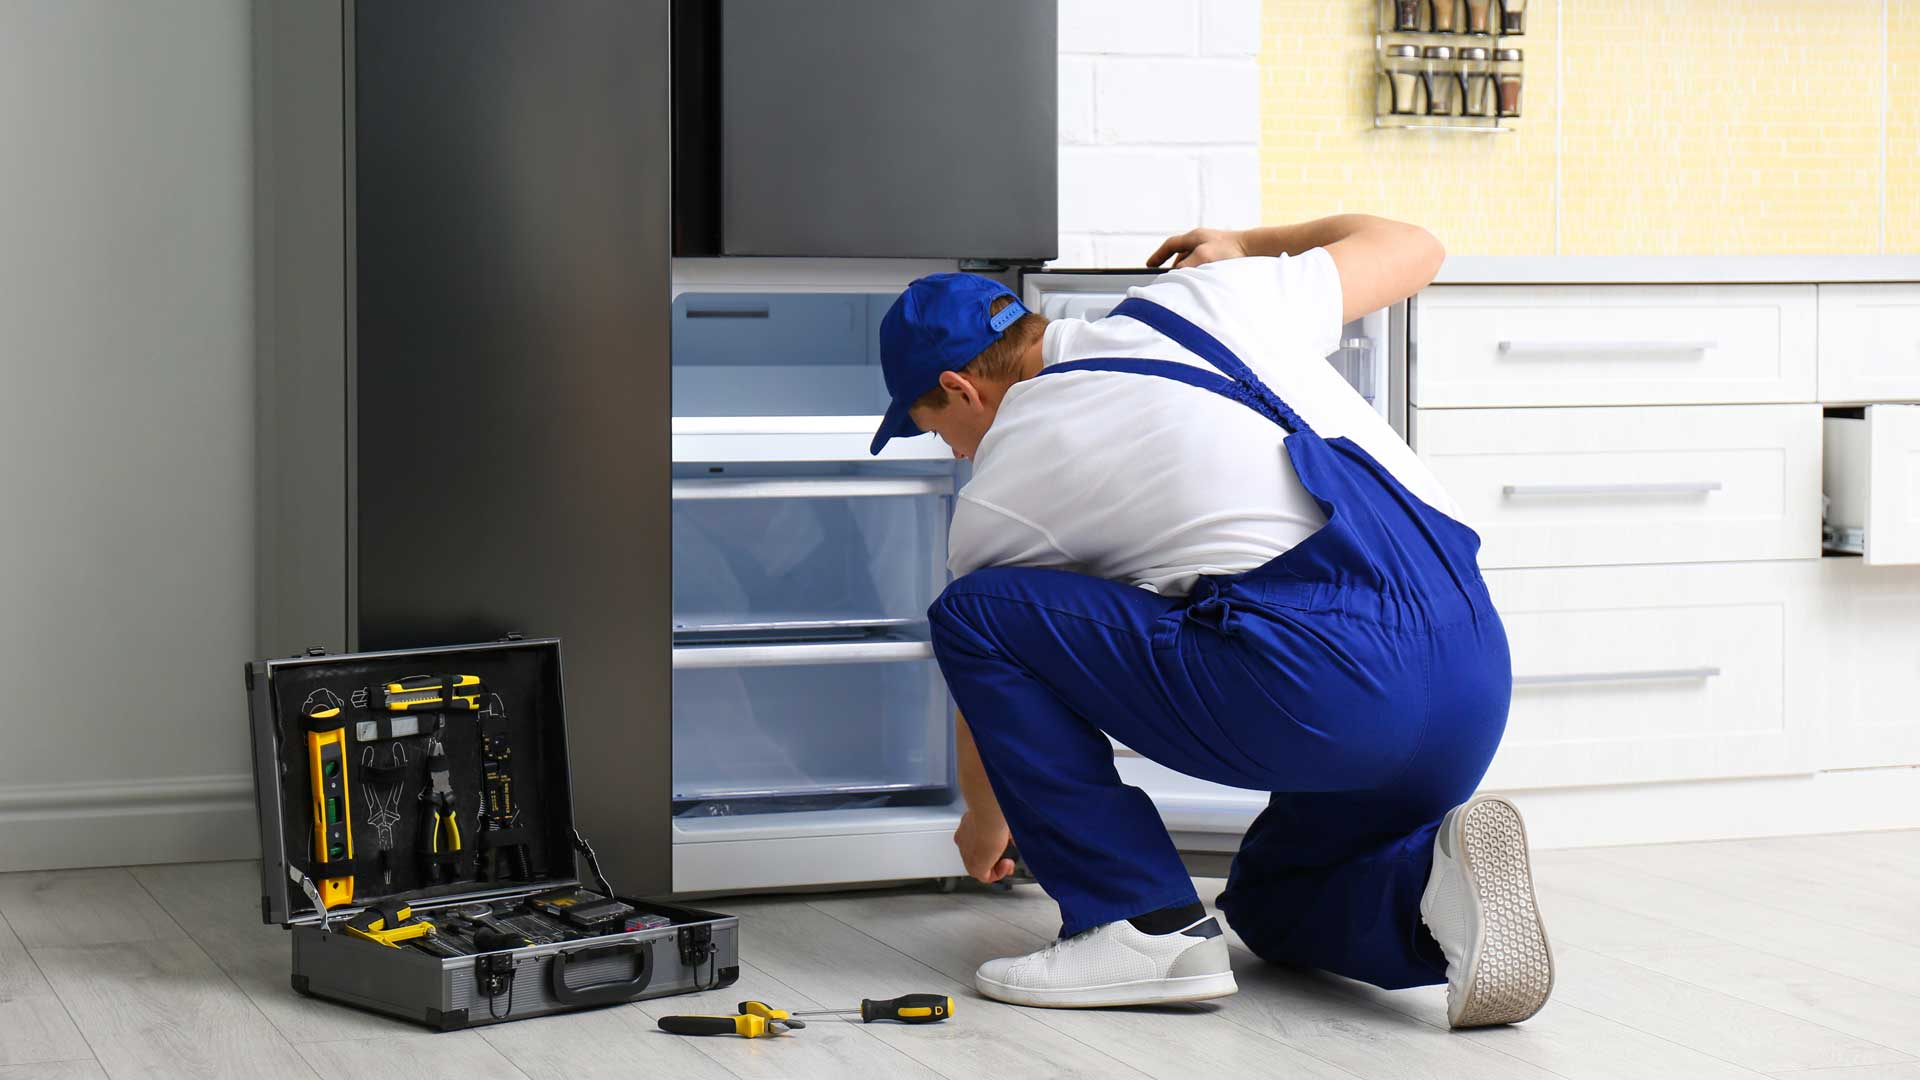 A man in blue overalls kneeling to inspect a refrigerator